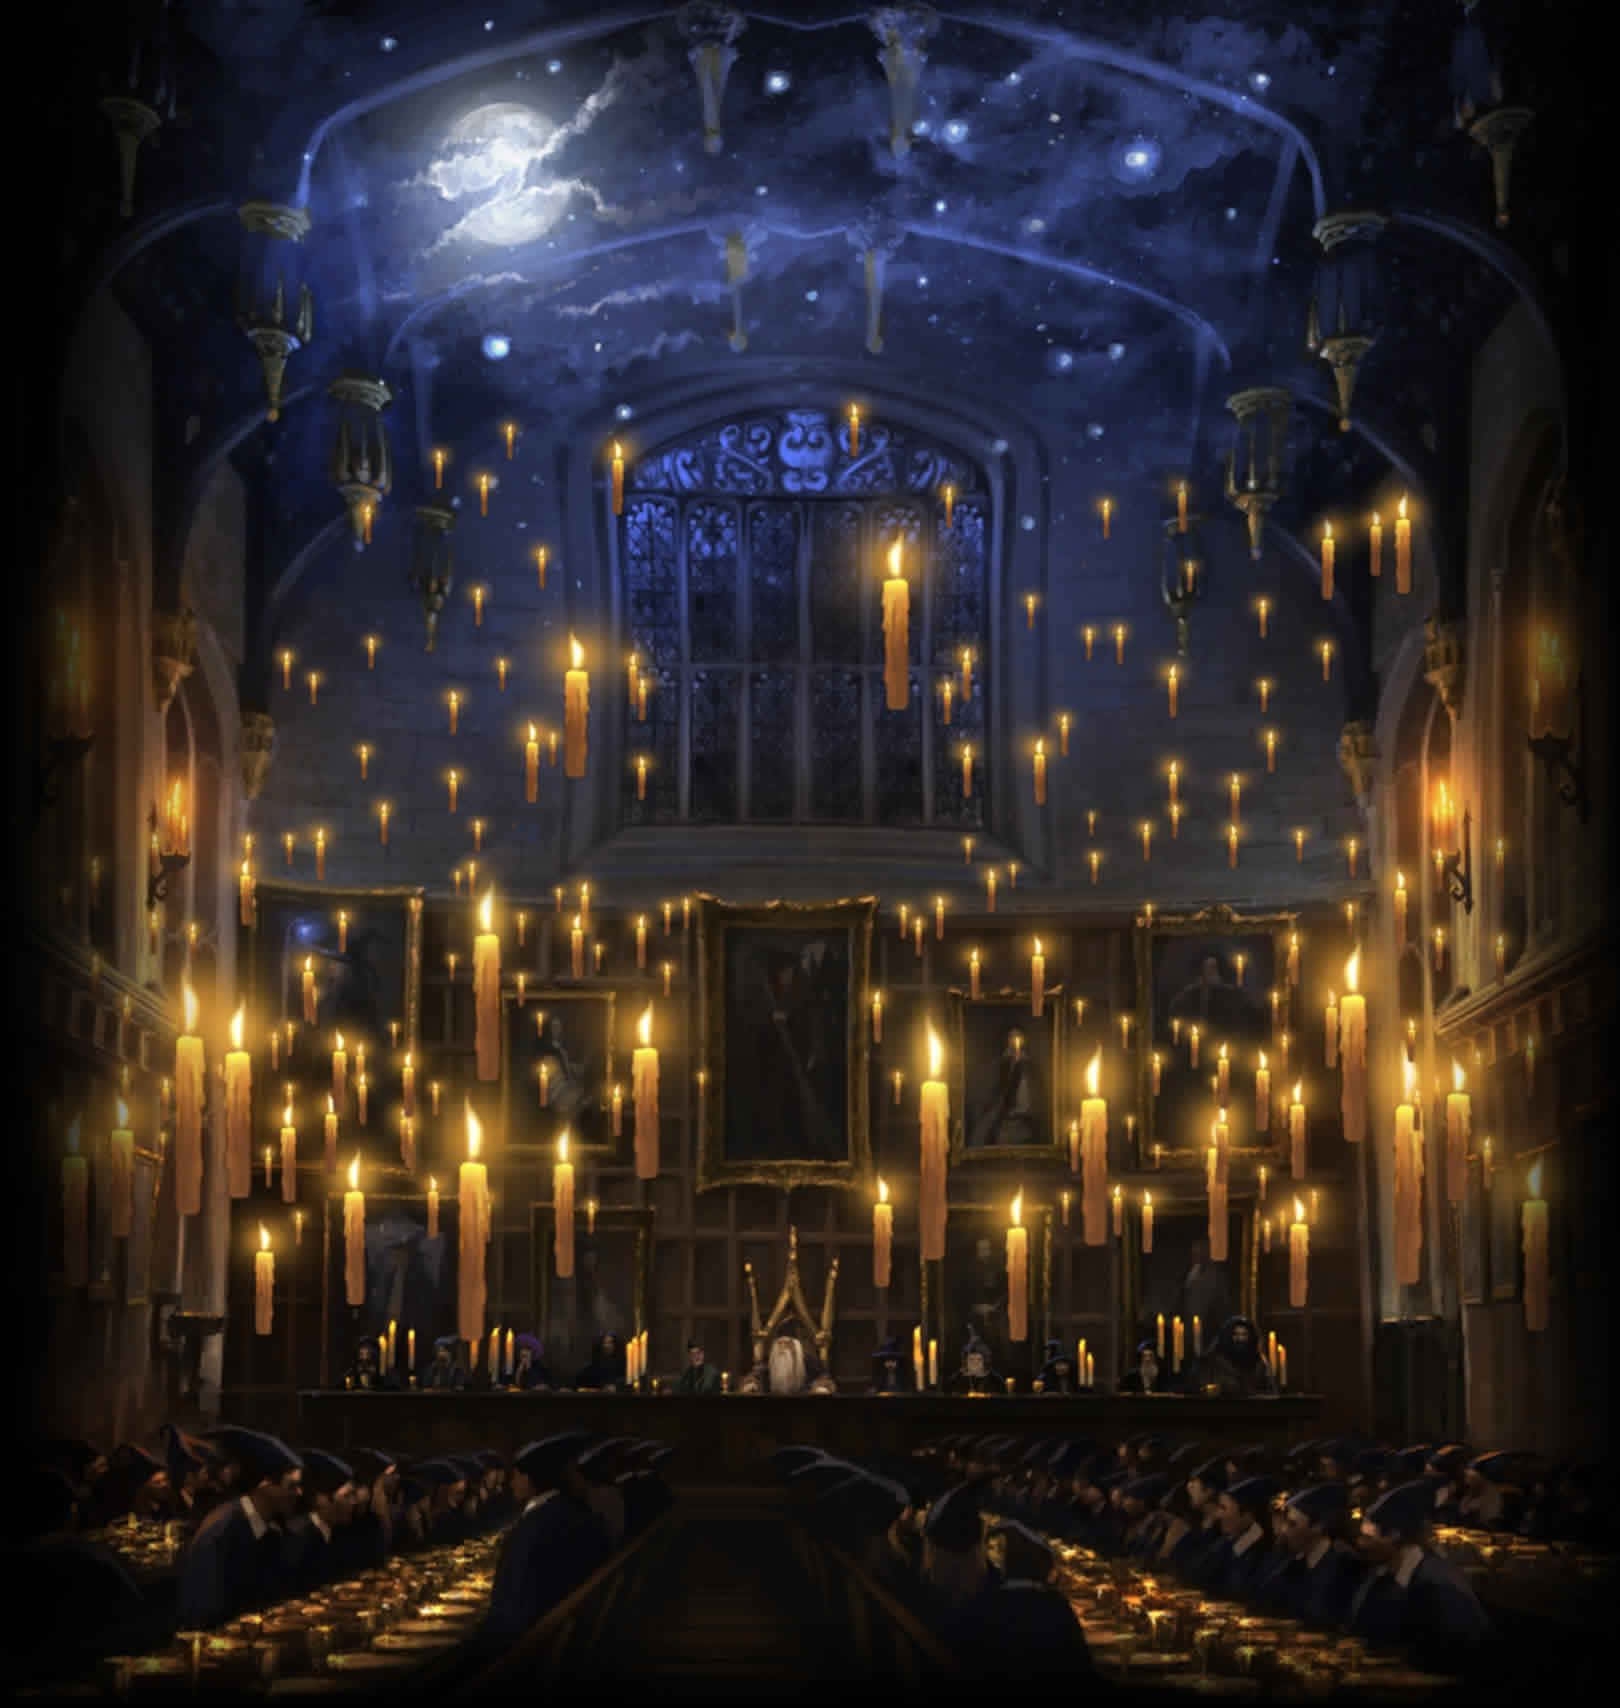 The Hogwarts Great Hall from Harry Potter Wallpaper